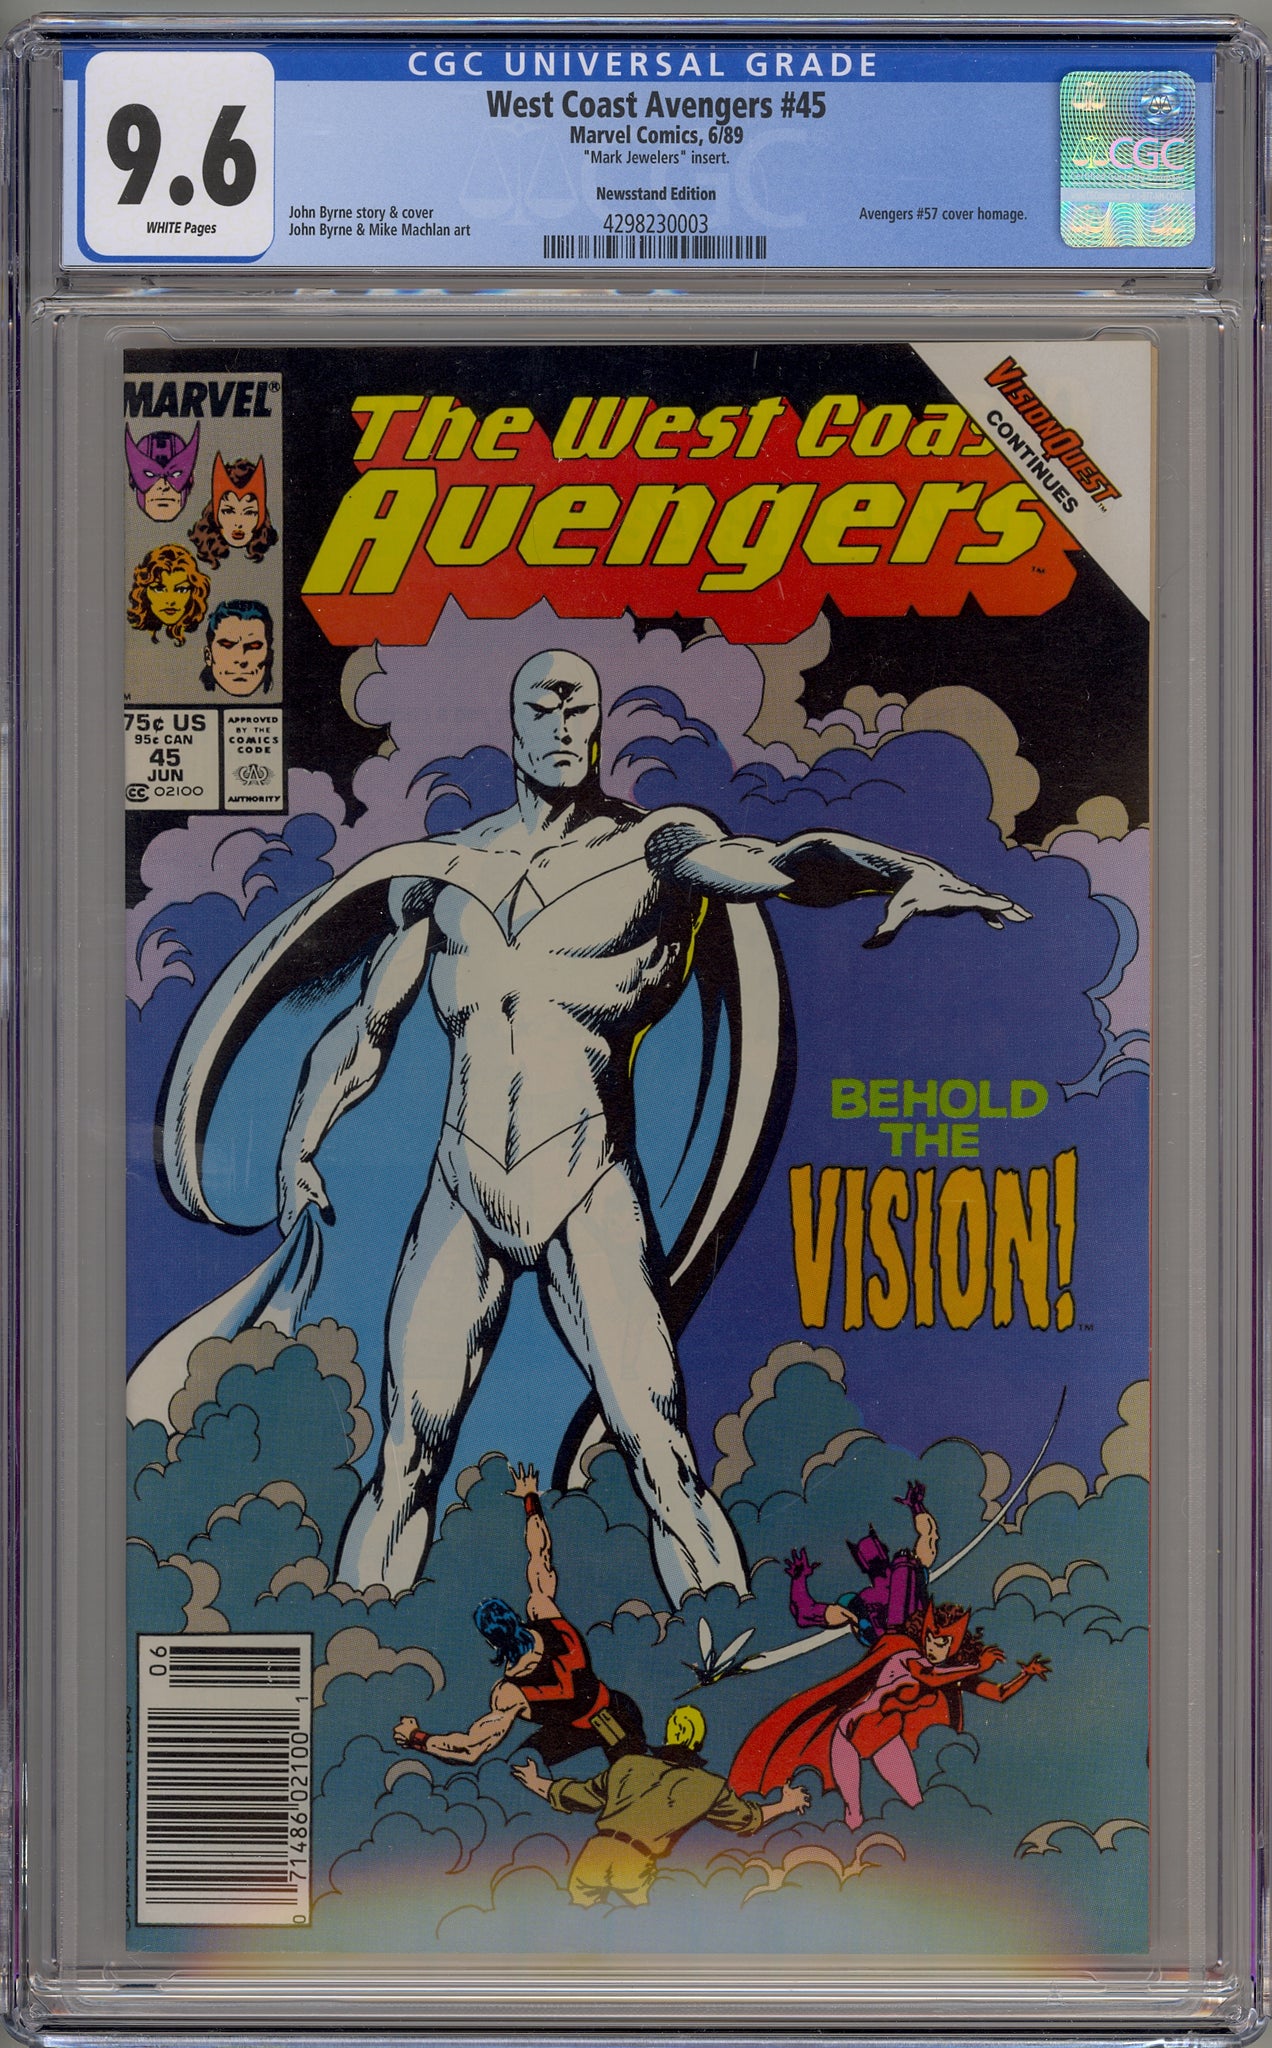 West Coast Avengers #45 (1989) White Vision, Mark Jewelers newsstand edition